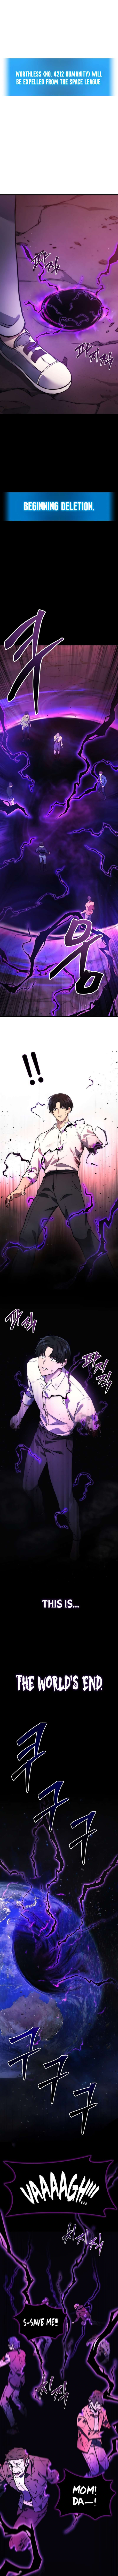 Martial God Regressed to Level 2 Chapter 1 page 15